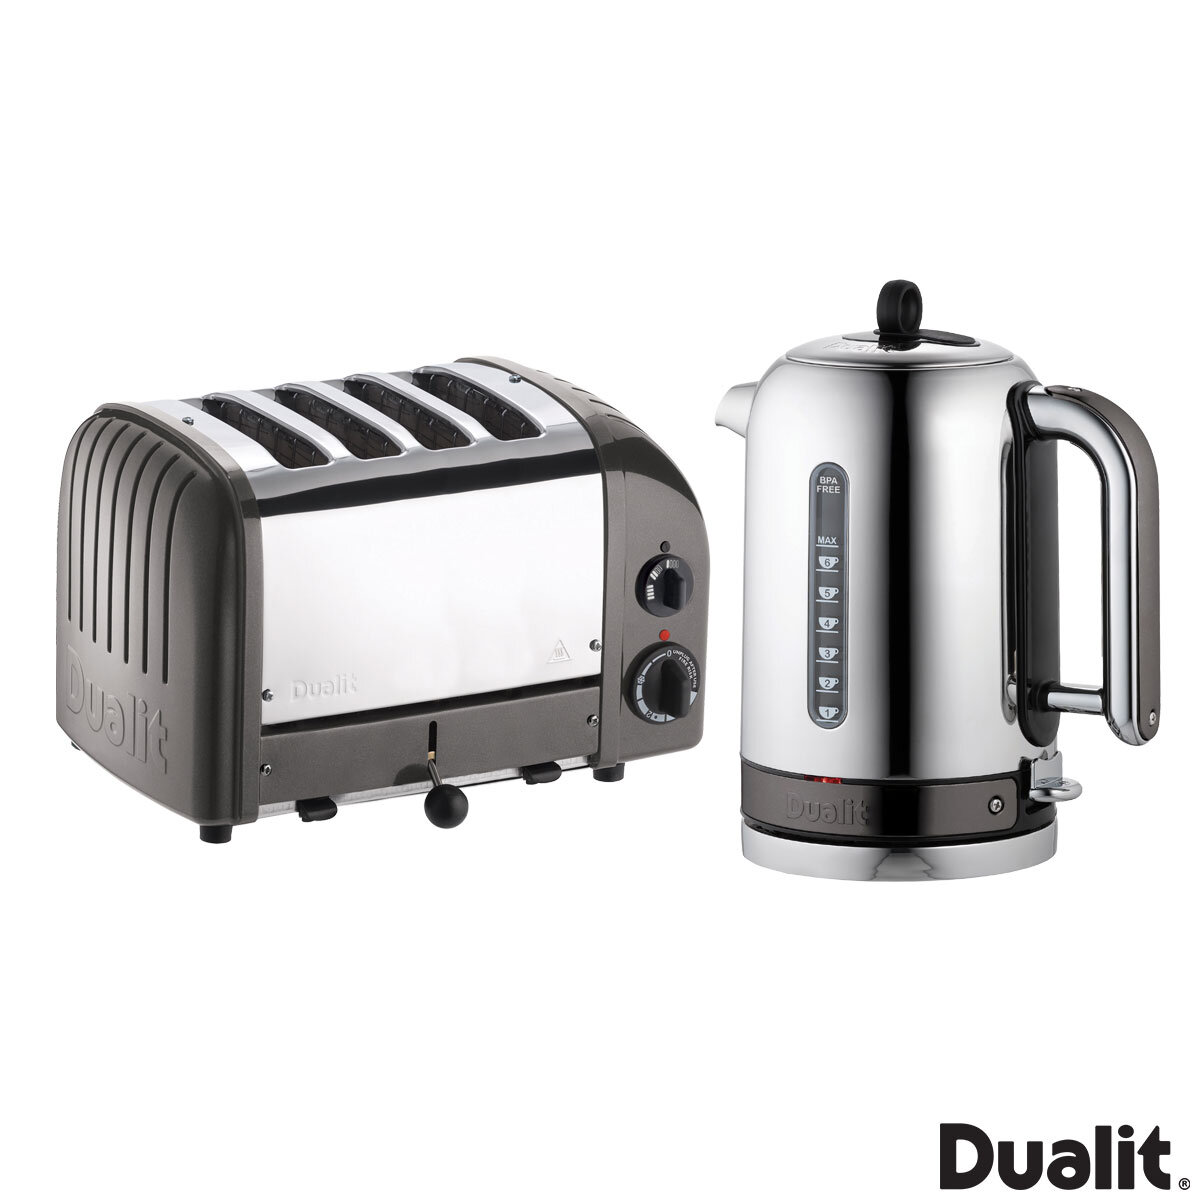 Dualit Classic Kettle Review